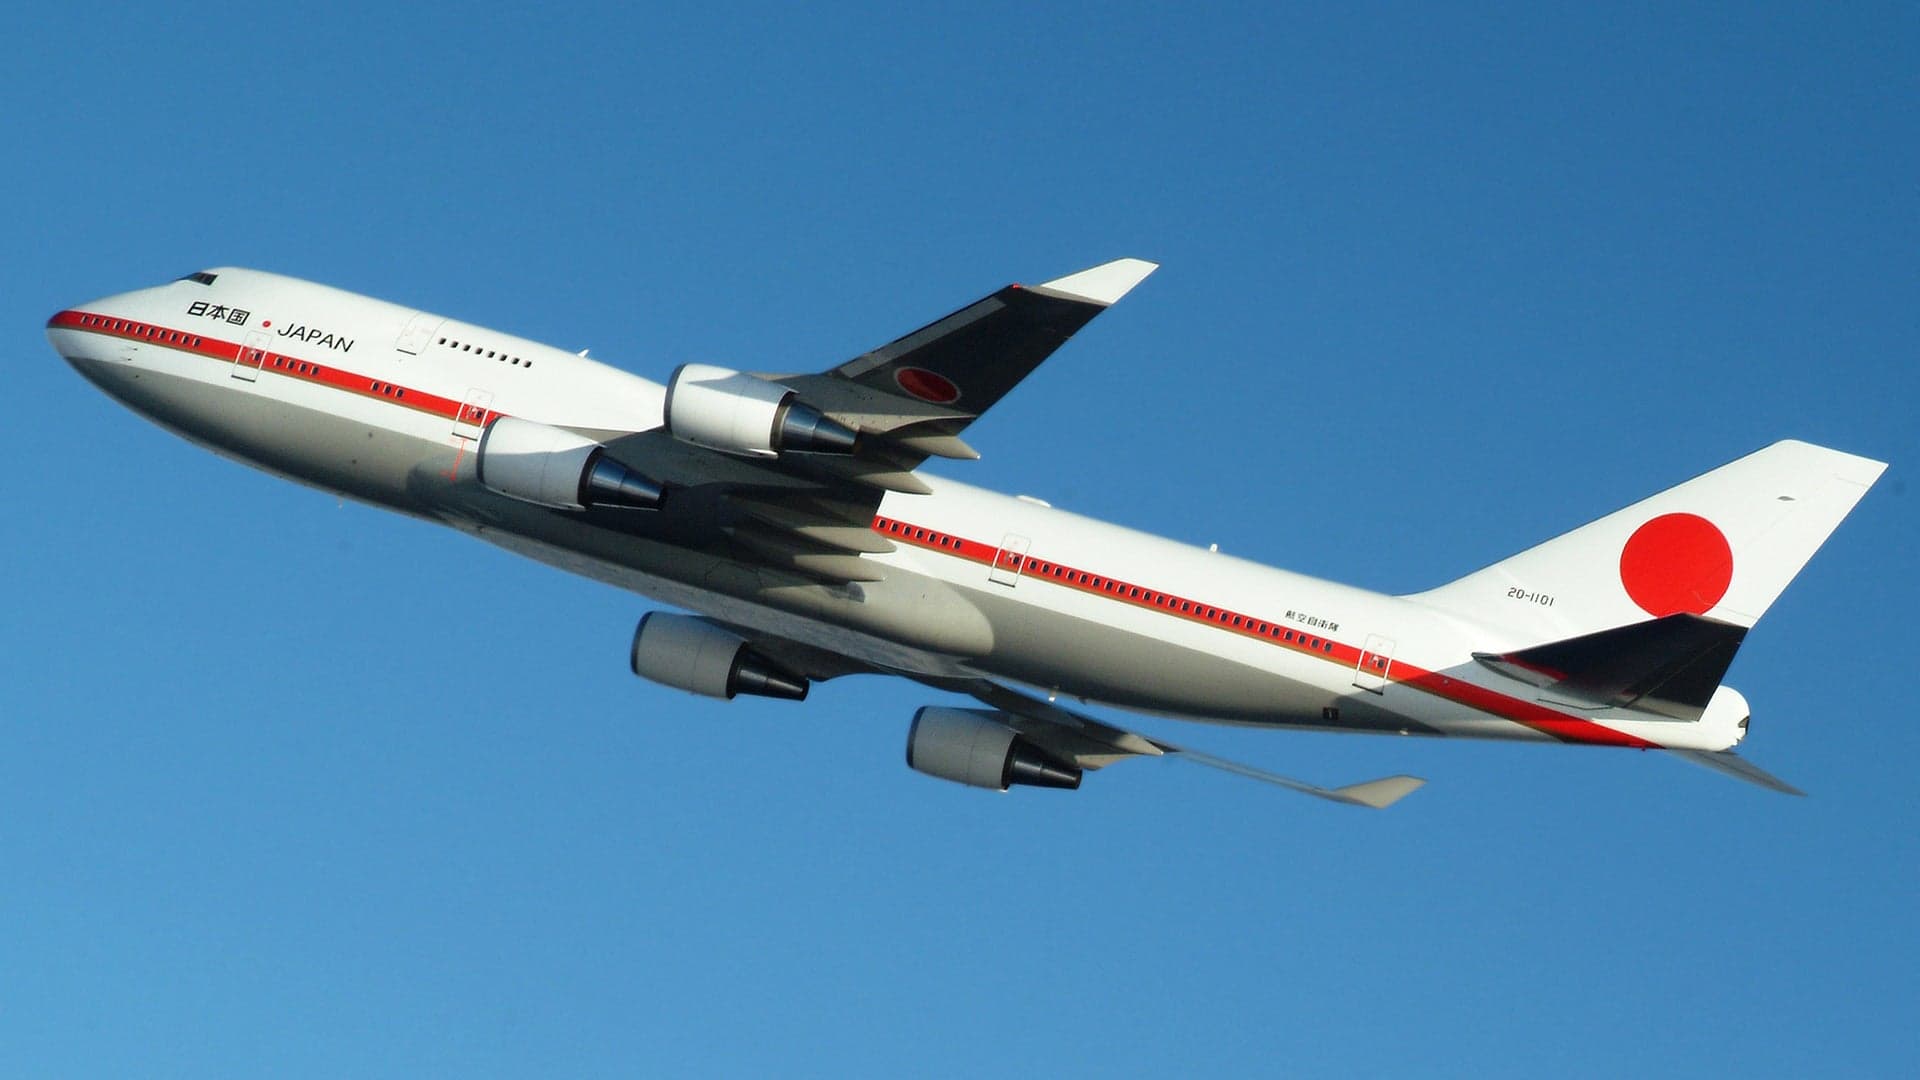 You Can Buy Japan’s ‘Air Force One’ 747 Jumbo Jet